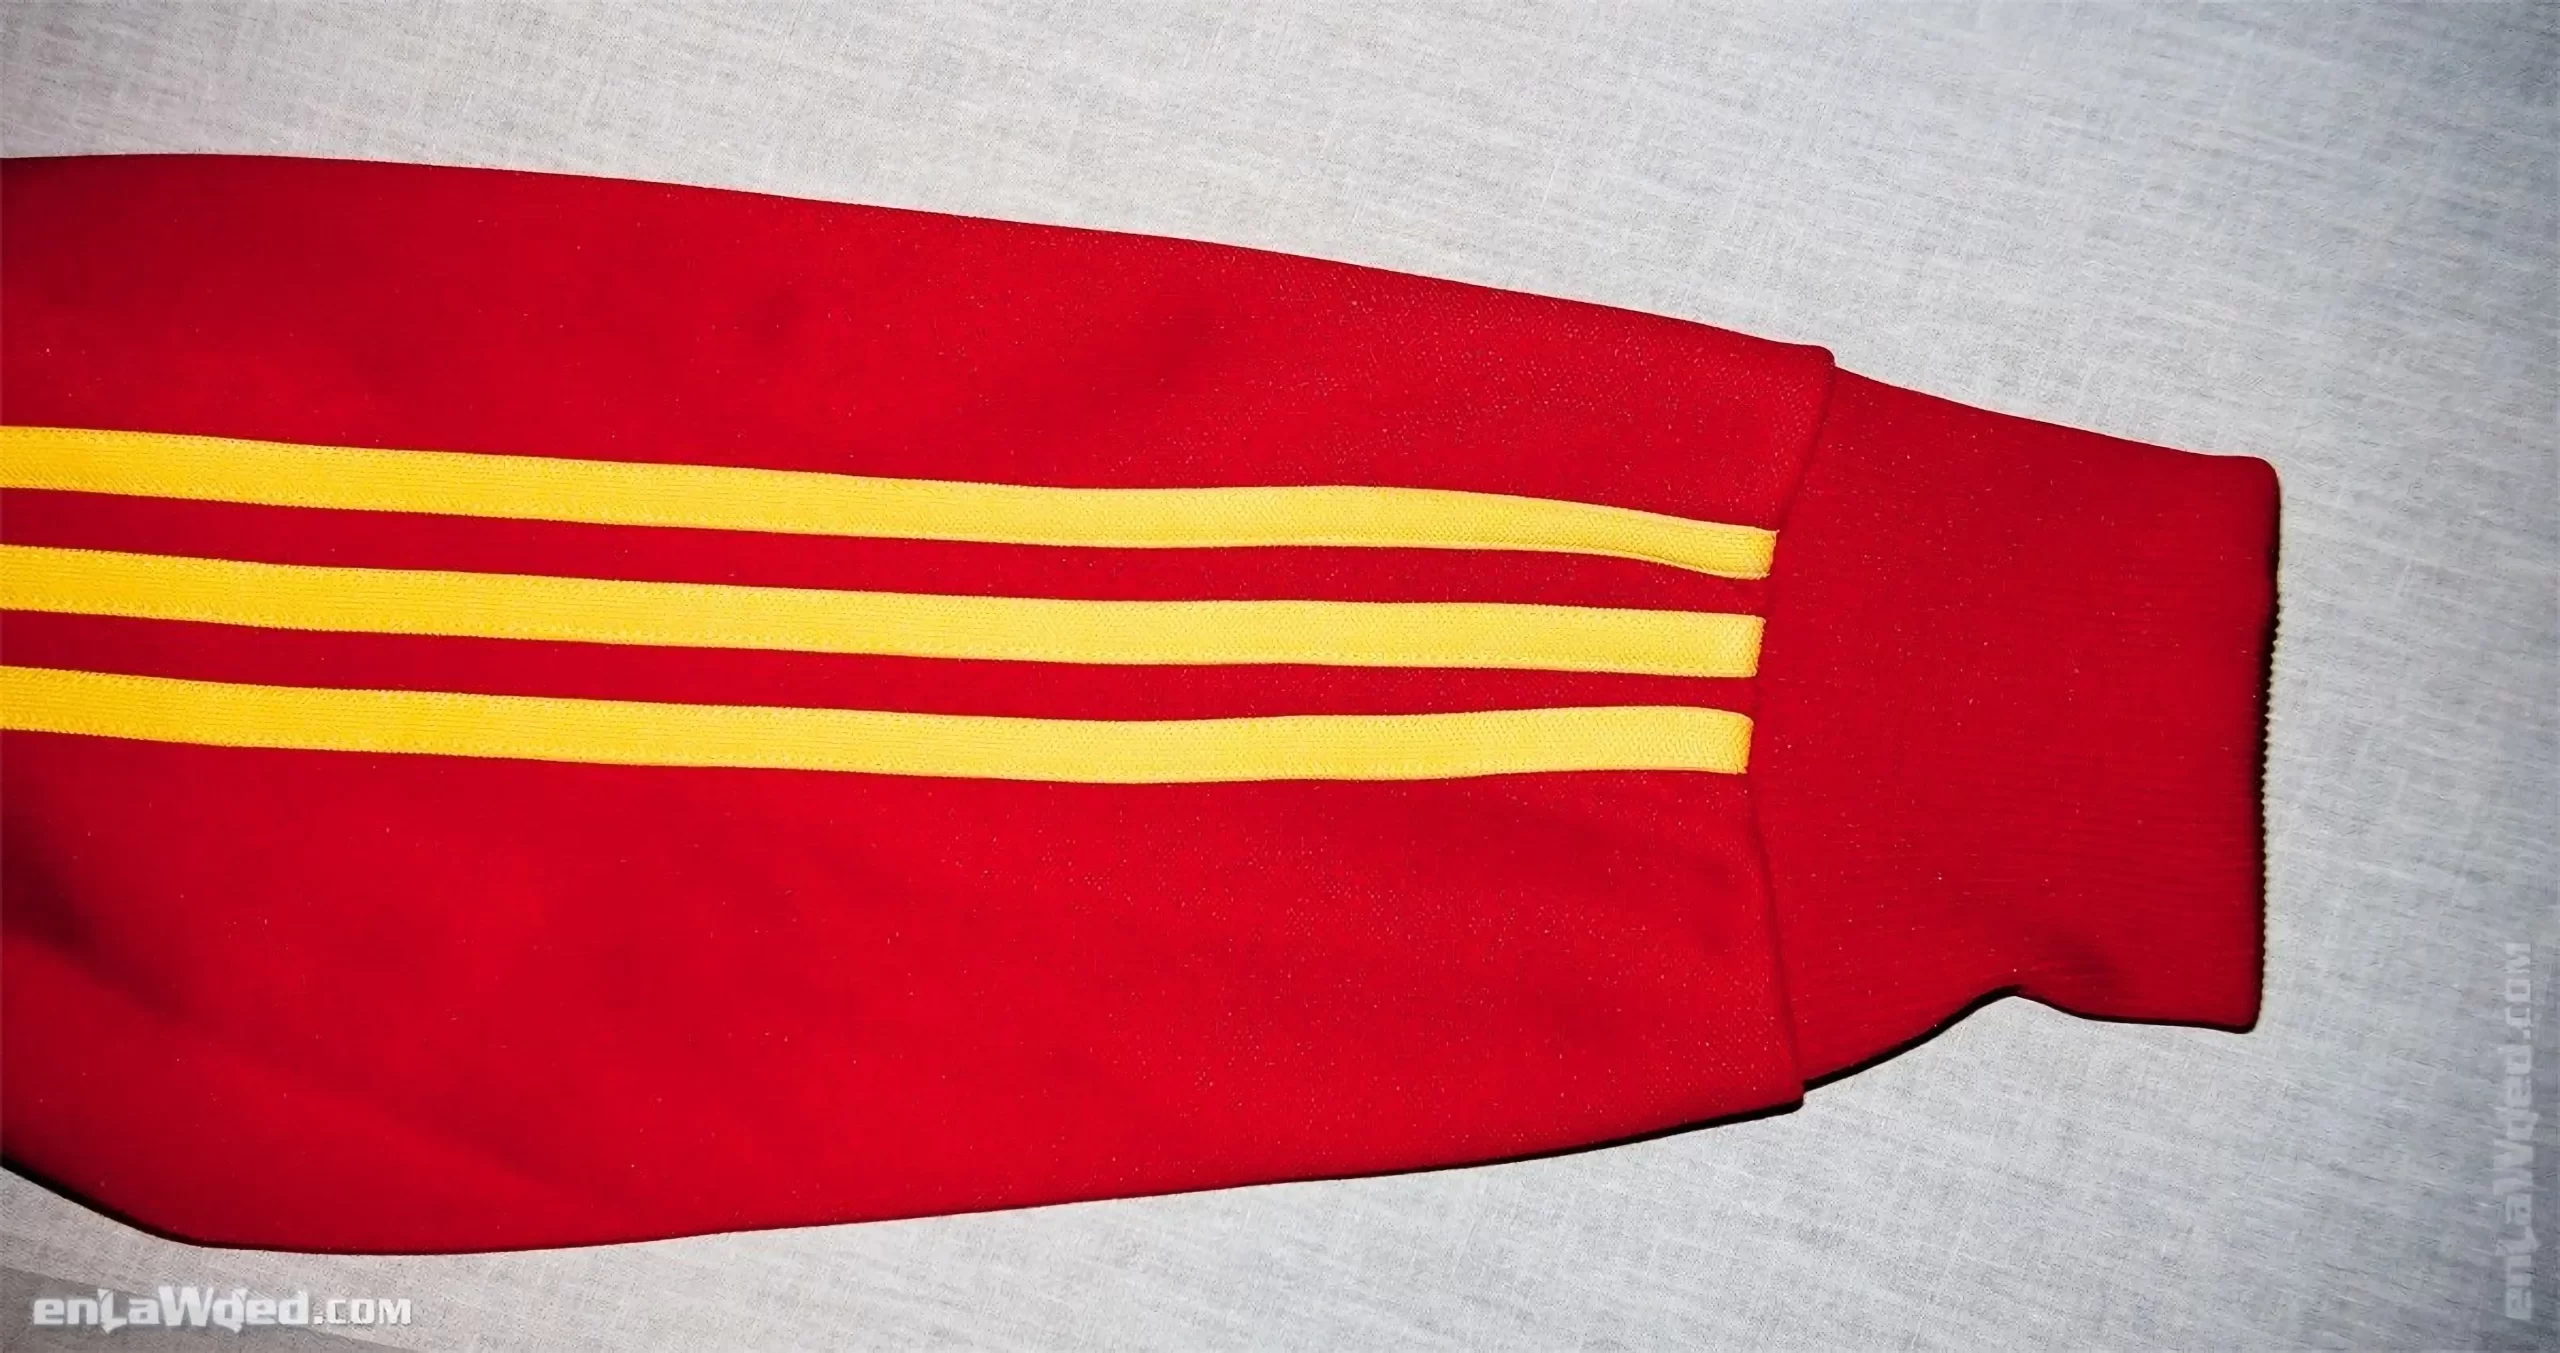 View on one the Ethiopian jacket's sleeves, in red with yellow 3-stripes